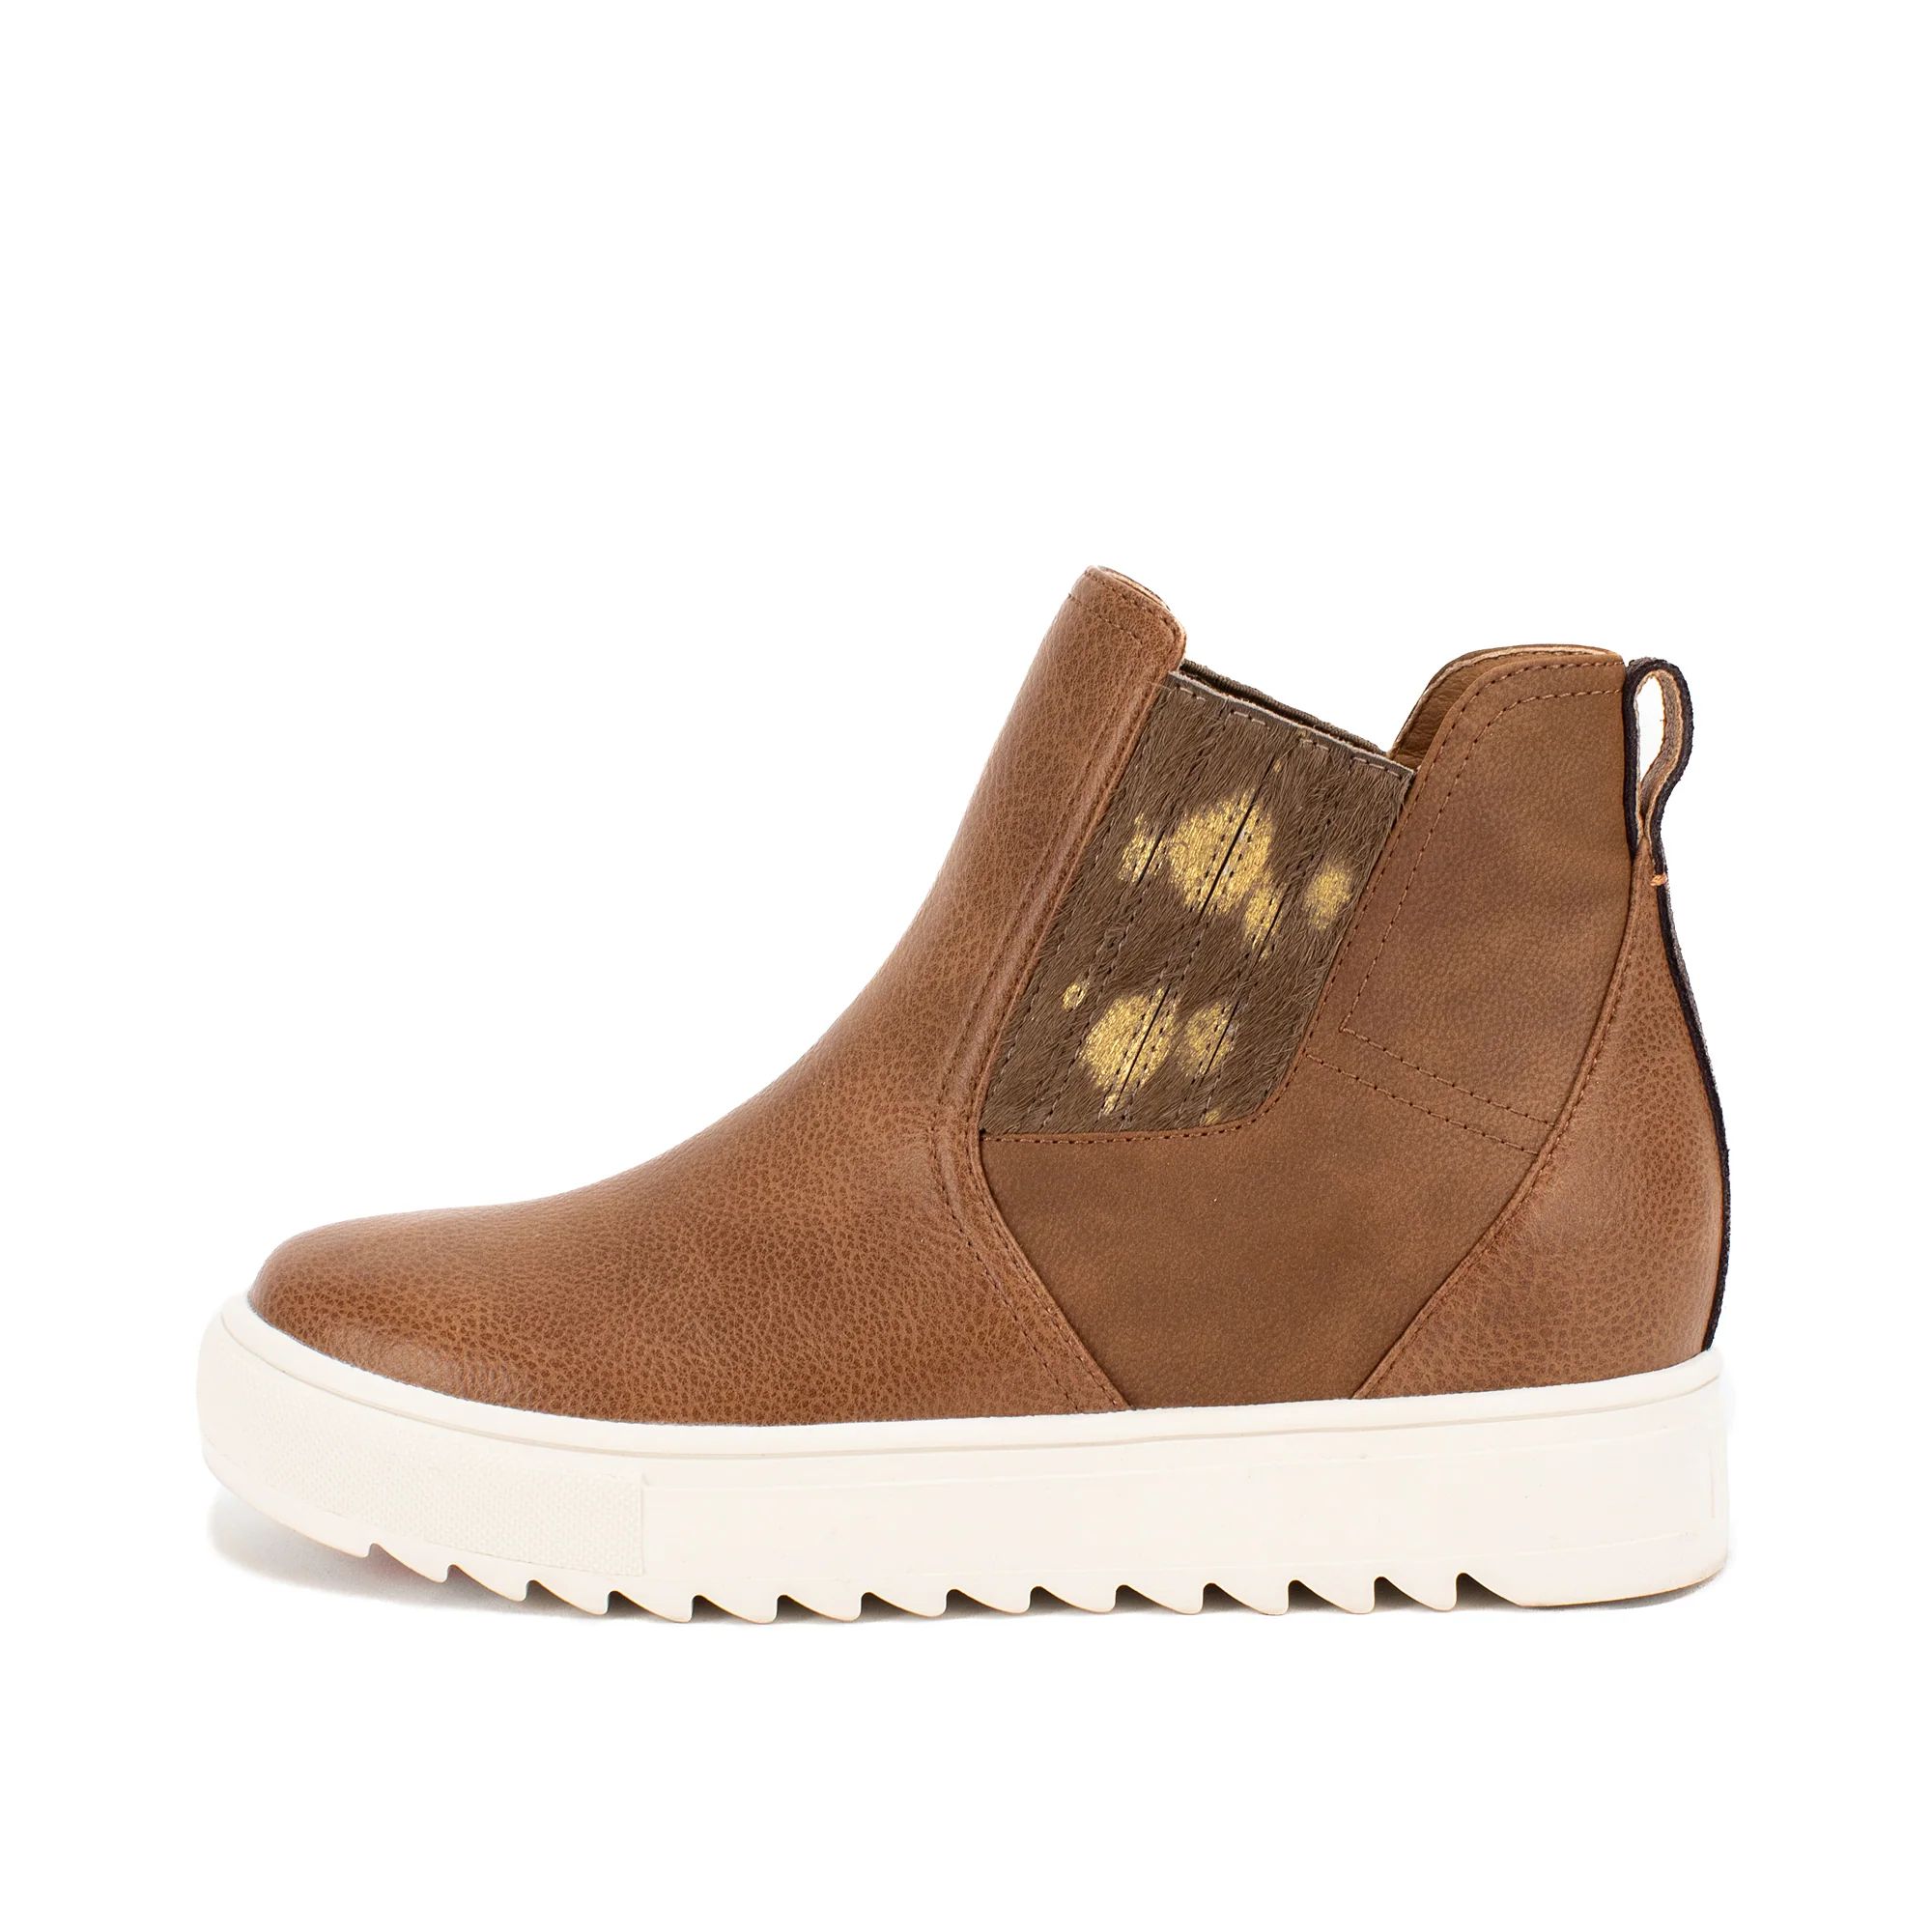 Malvena Wedge Sneaker Boot | Yellow Box Official Site | Yellow Box